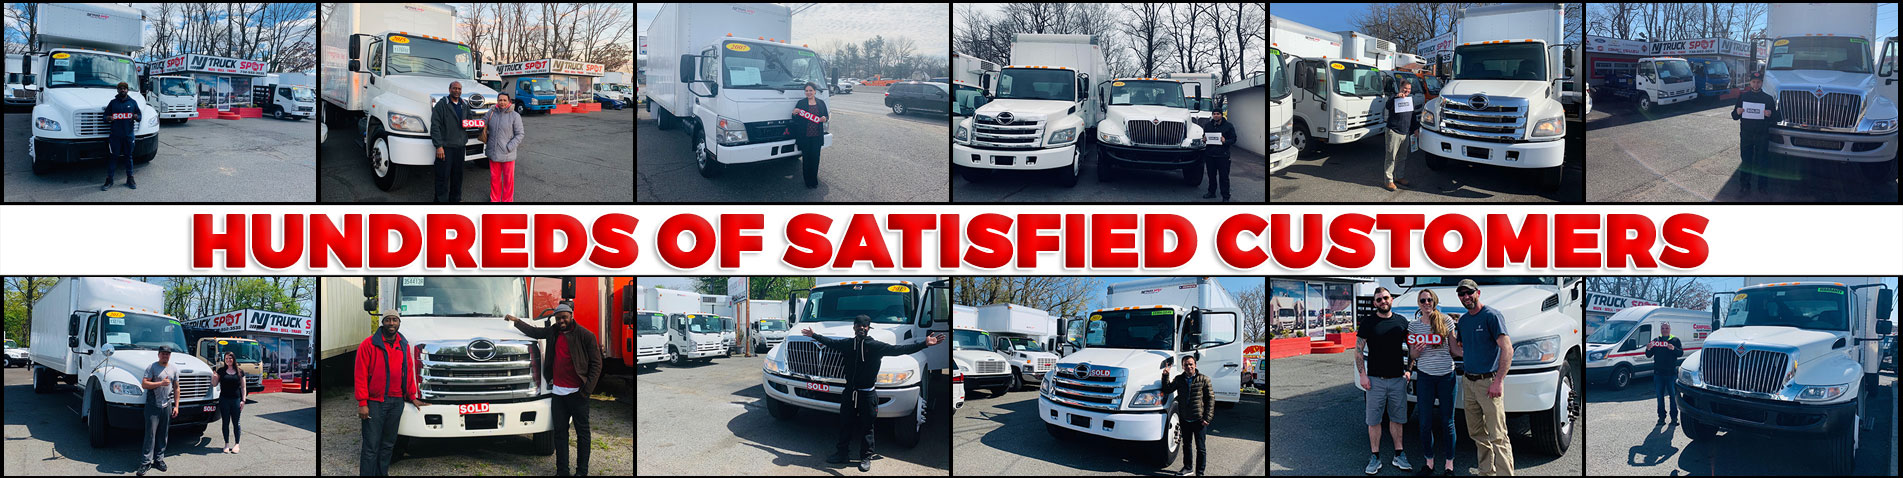 Used trucks for sale in South Amboy | NJ Truck Spot. South Amboy New Jersey.